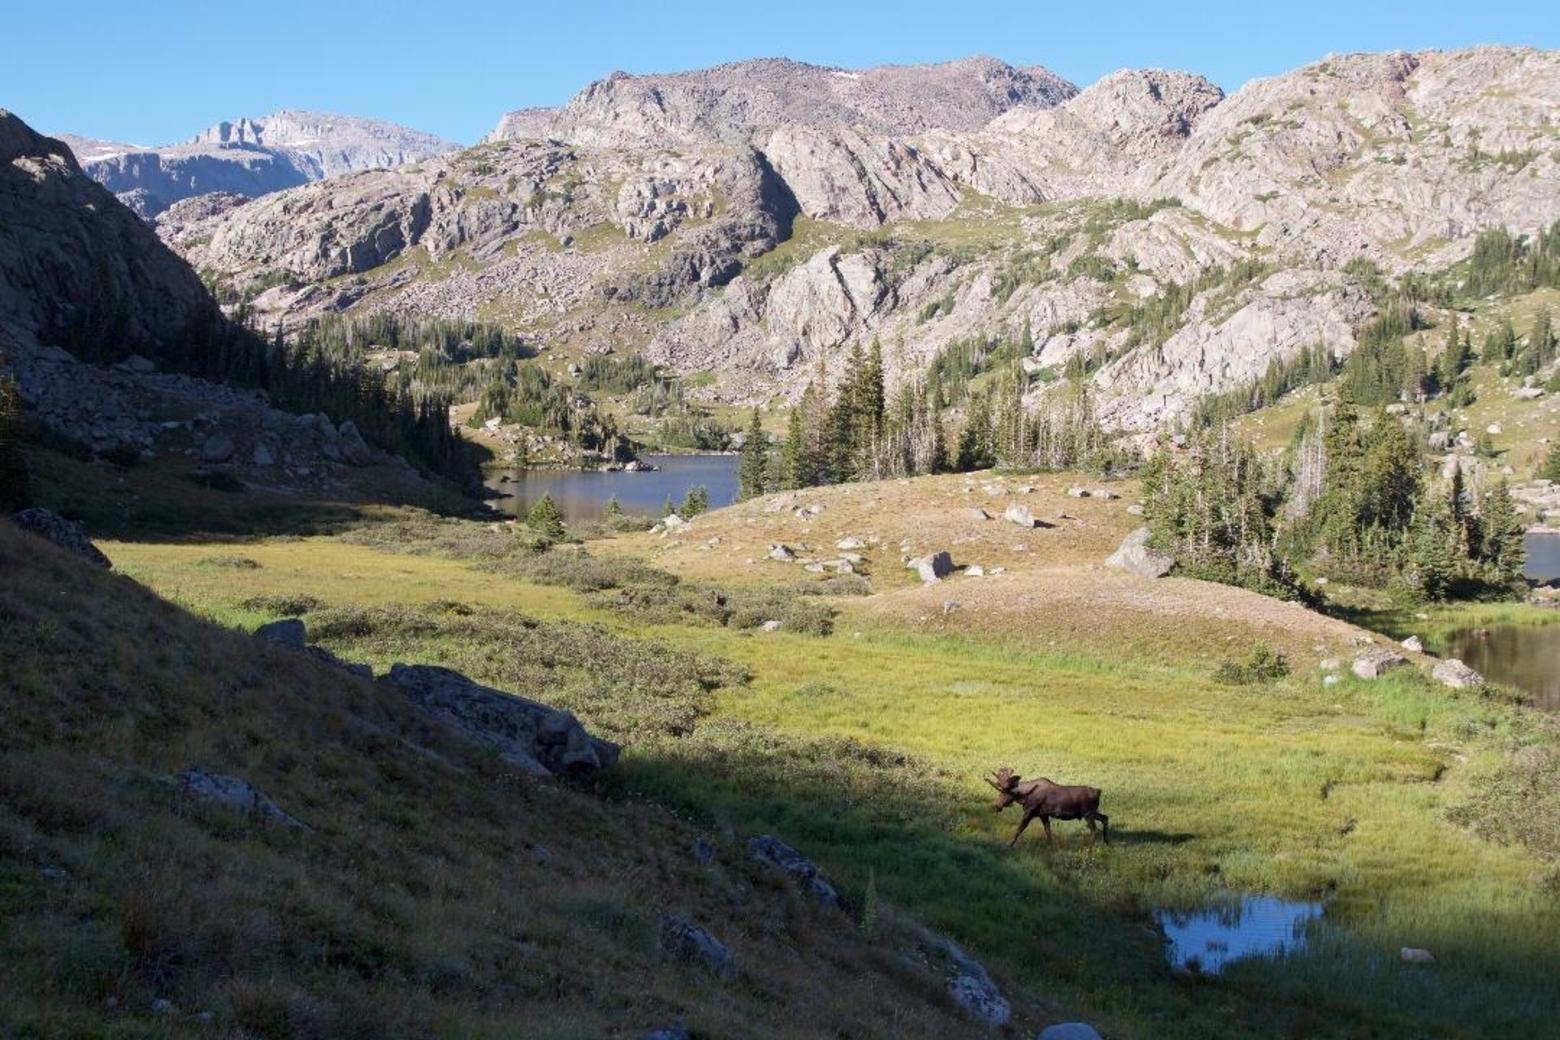 Cloud Peak Wilderness in Wyoming, resulting from an effort spearheaded by the Wyoming Wilderness Association.  Photo, at top, courtesy Julie Greer and just above by  John Steitz (johnsteitz@me.com). Do you see the moose?